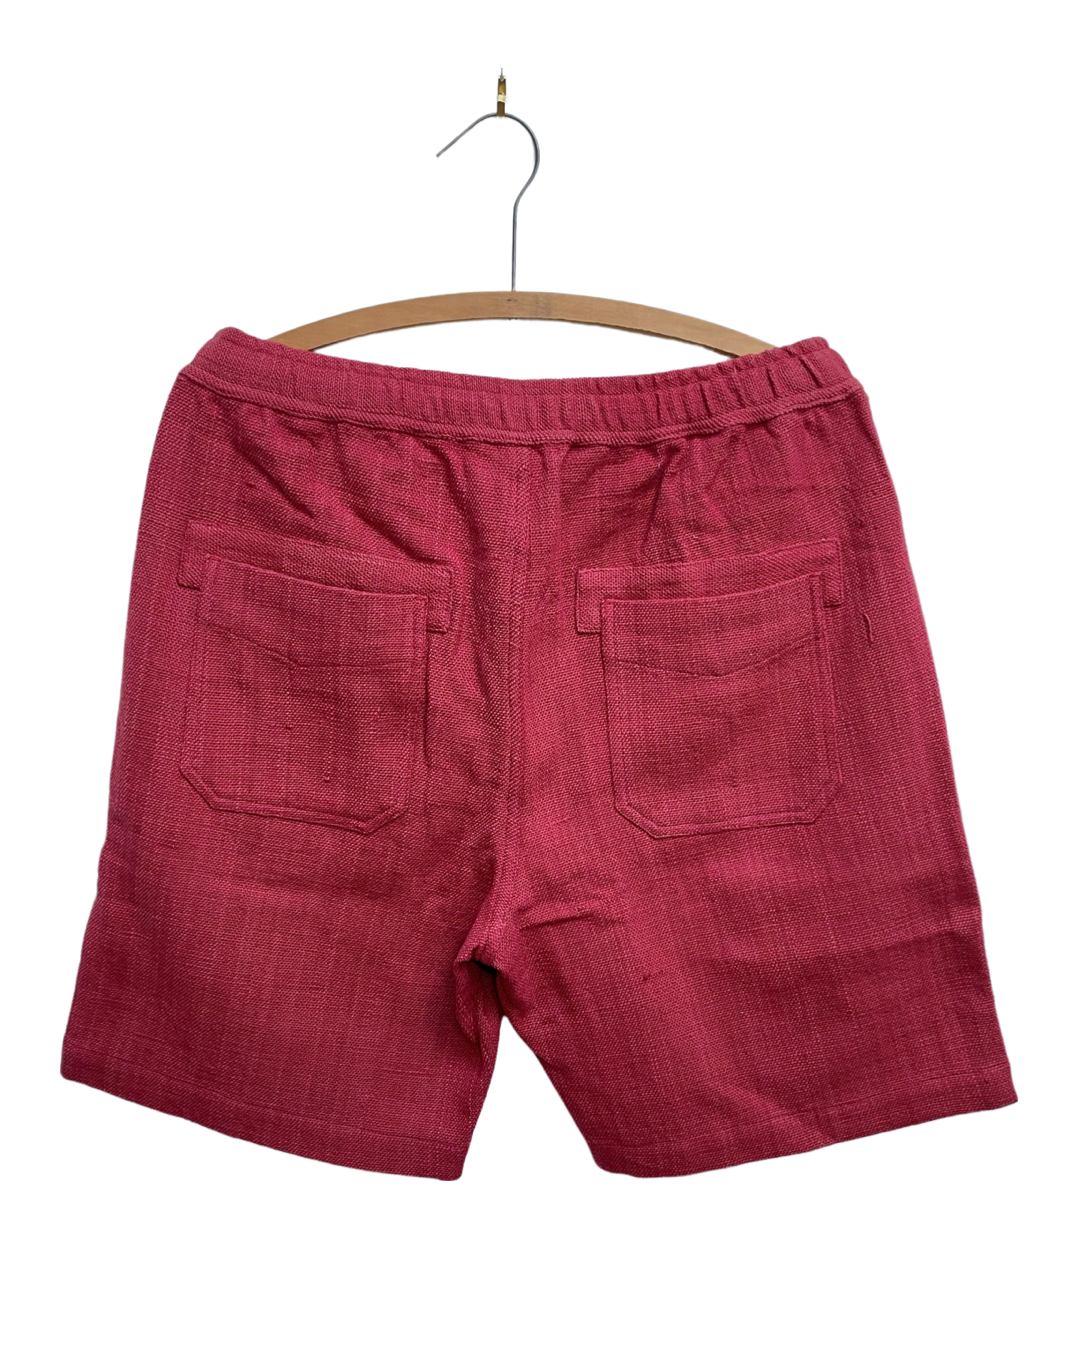 Utility Shorts in Pomegranate Nubby